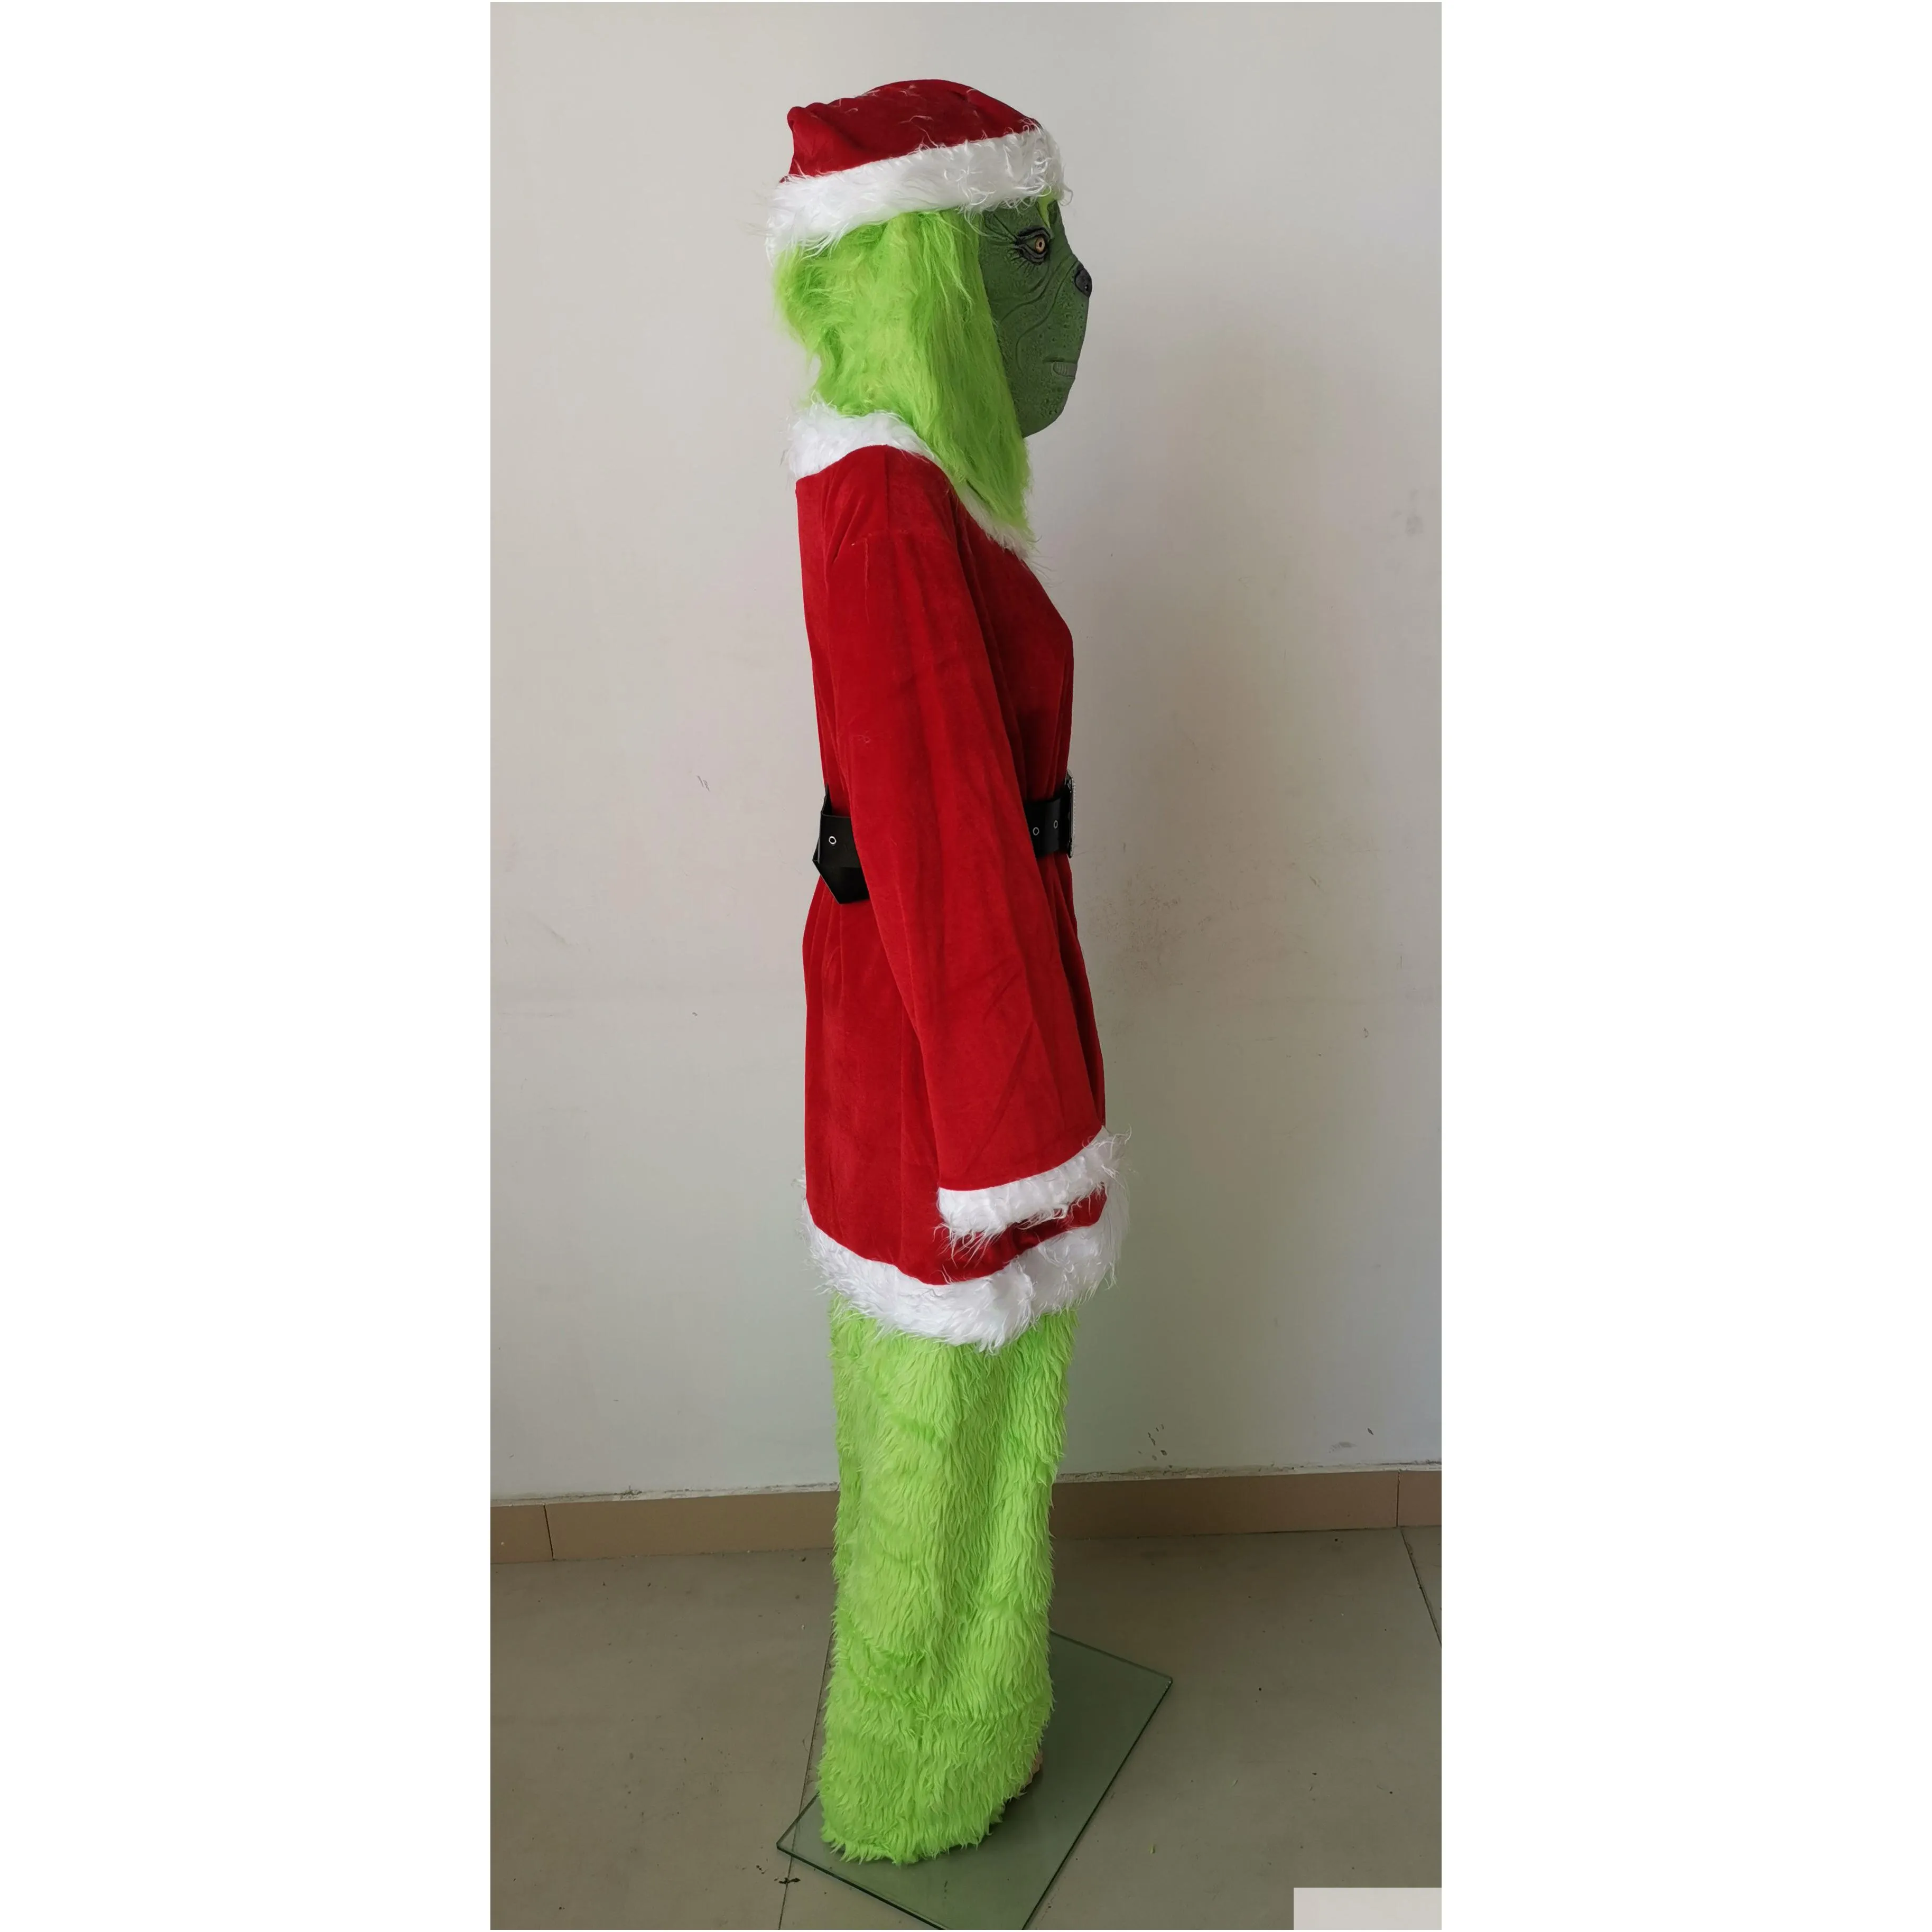 the green monster christmas cosplay costume christmas outfits with mask hats props xmas gift